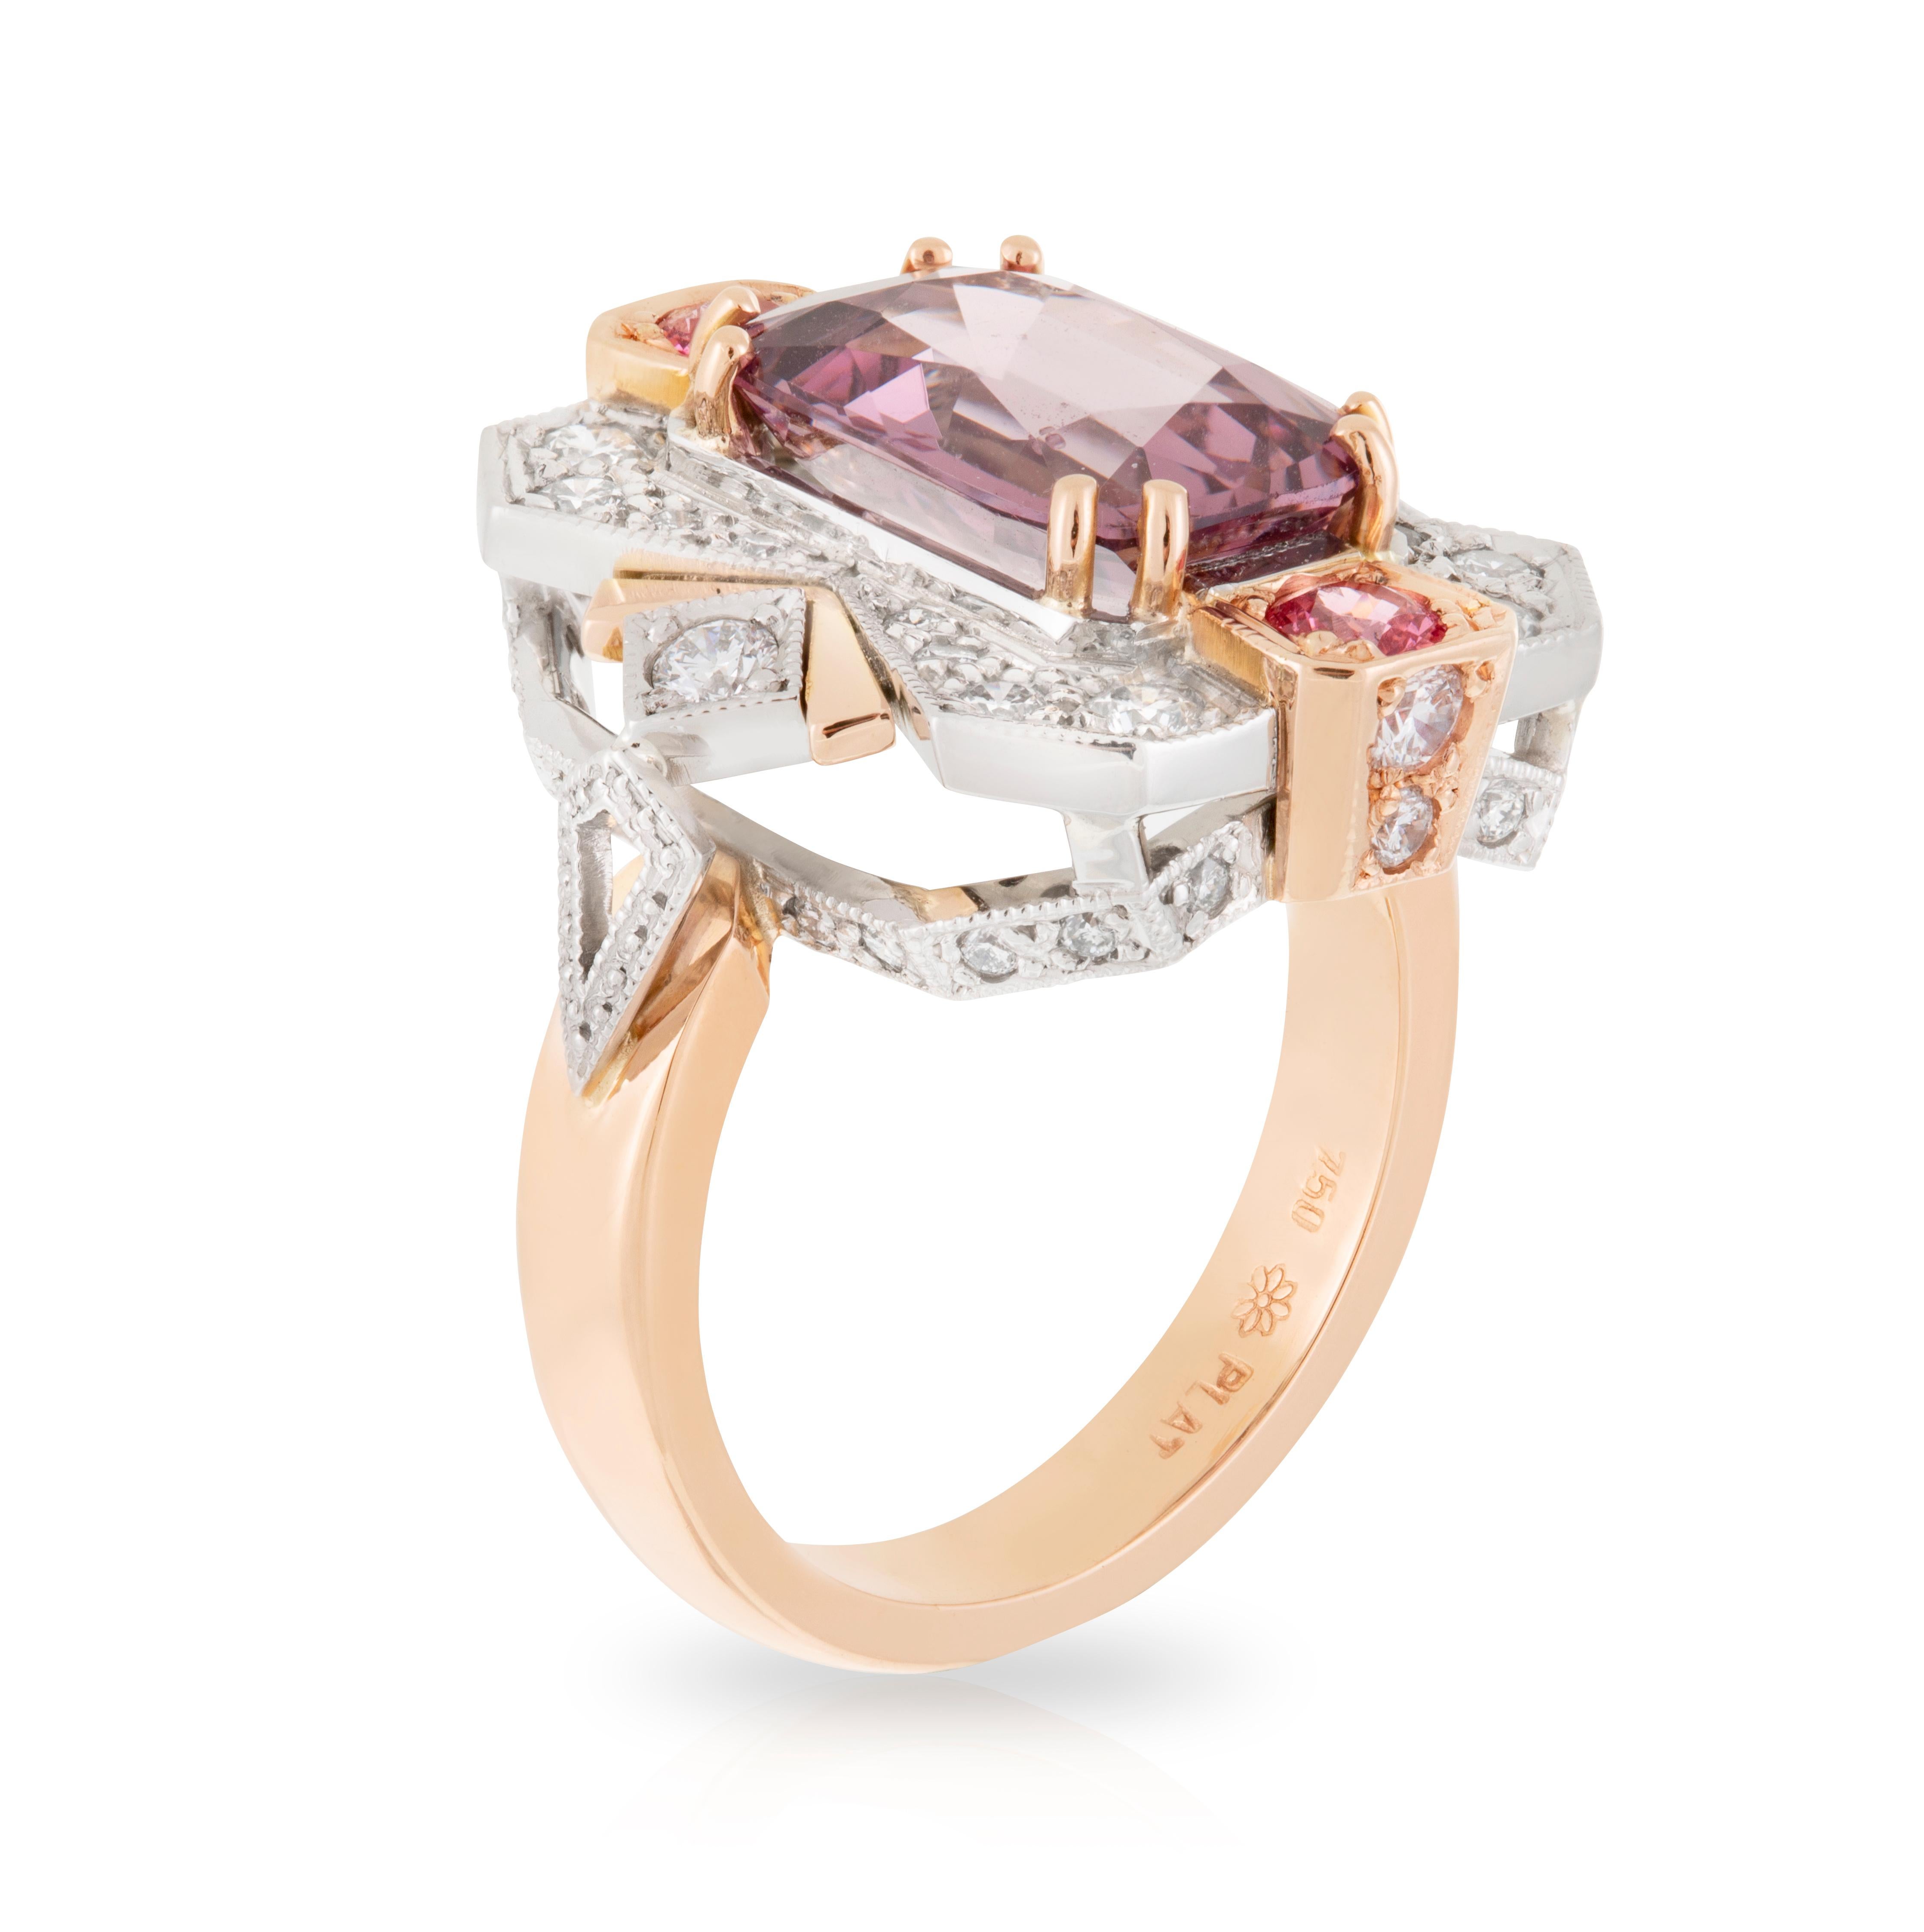 Handmade 18ct Rose Gold and Platinum Long 4.38ct Cushion Cut Mauve Spinel Centre, Pink Spinel accents and Geometric Diamond Art Deco Style Ring. TDW 0.89ct
